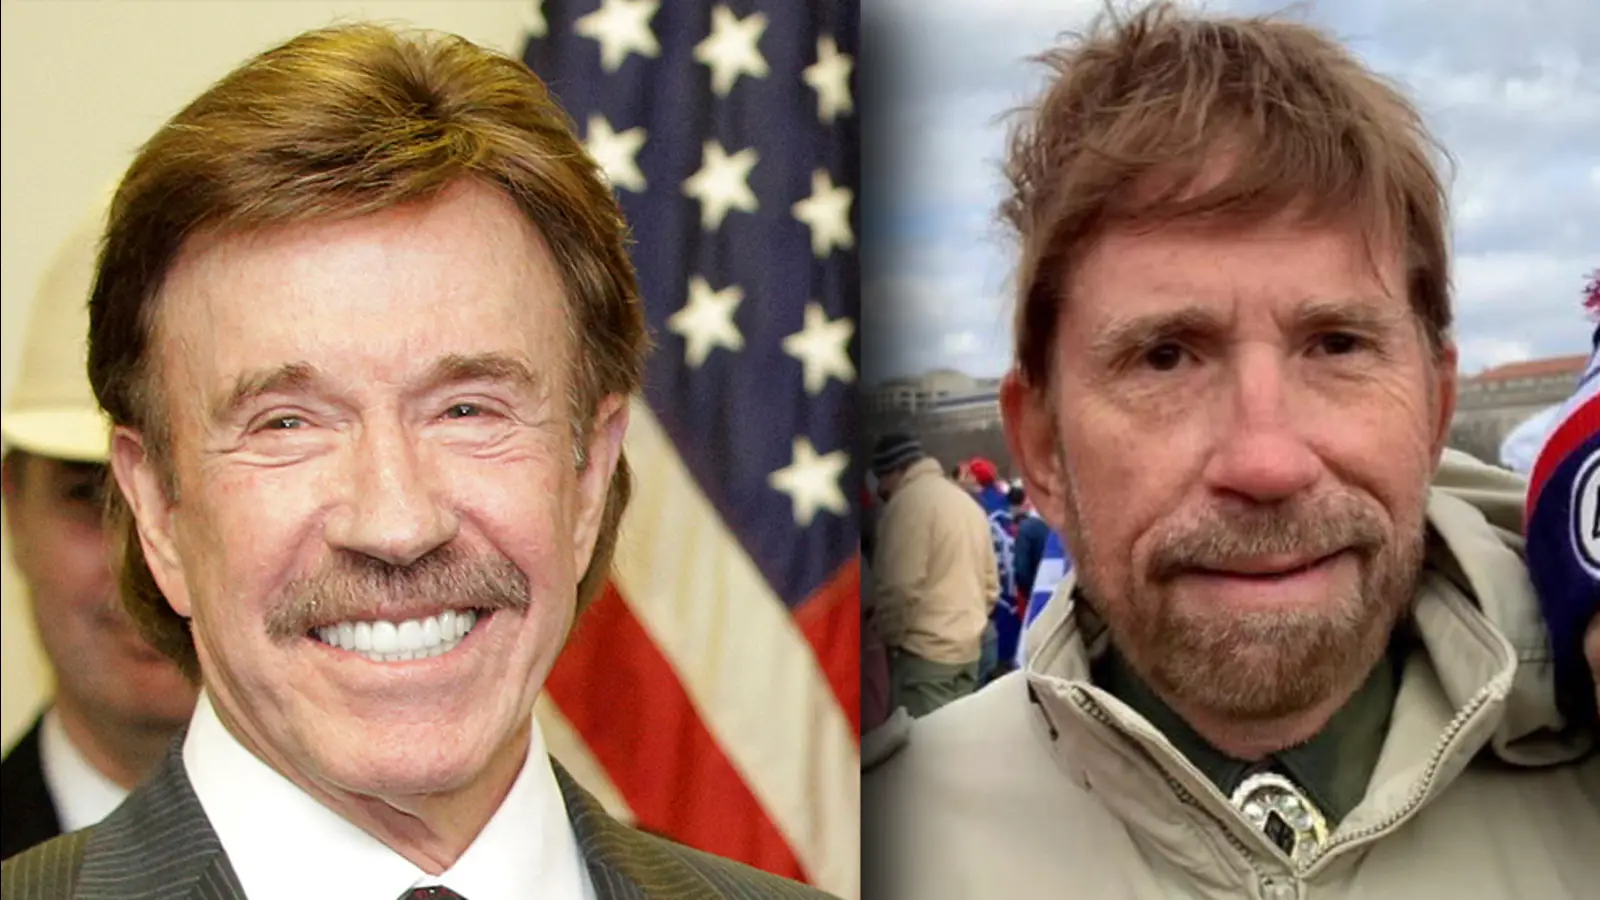 Photo of Chuck Norris’ manager says actor was not at U.S. Capitol riot